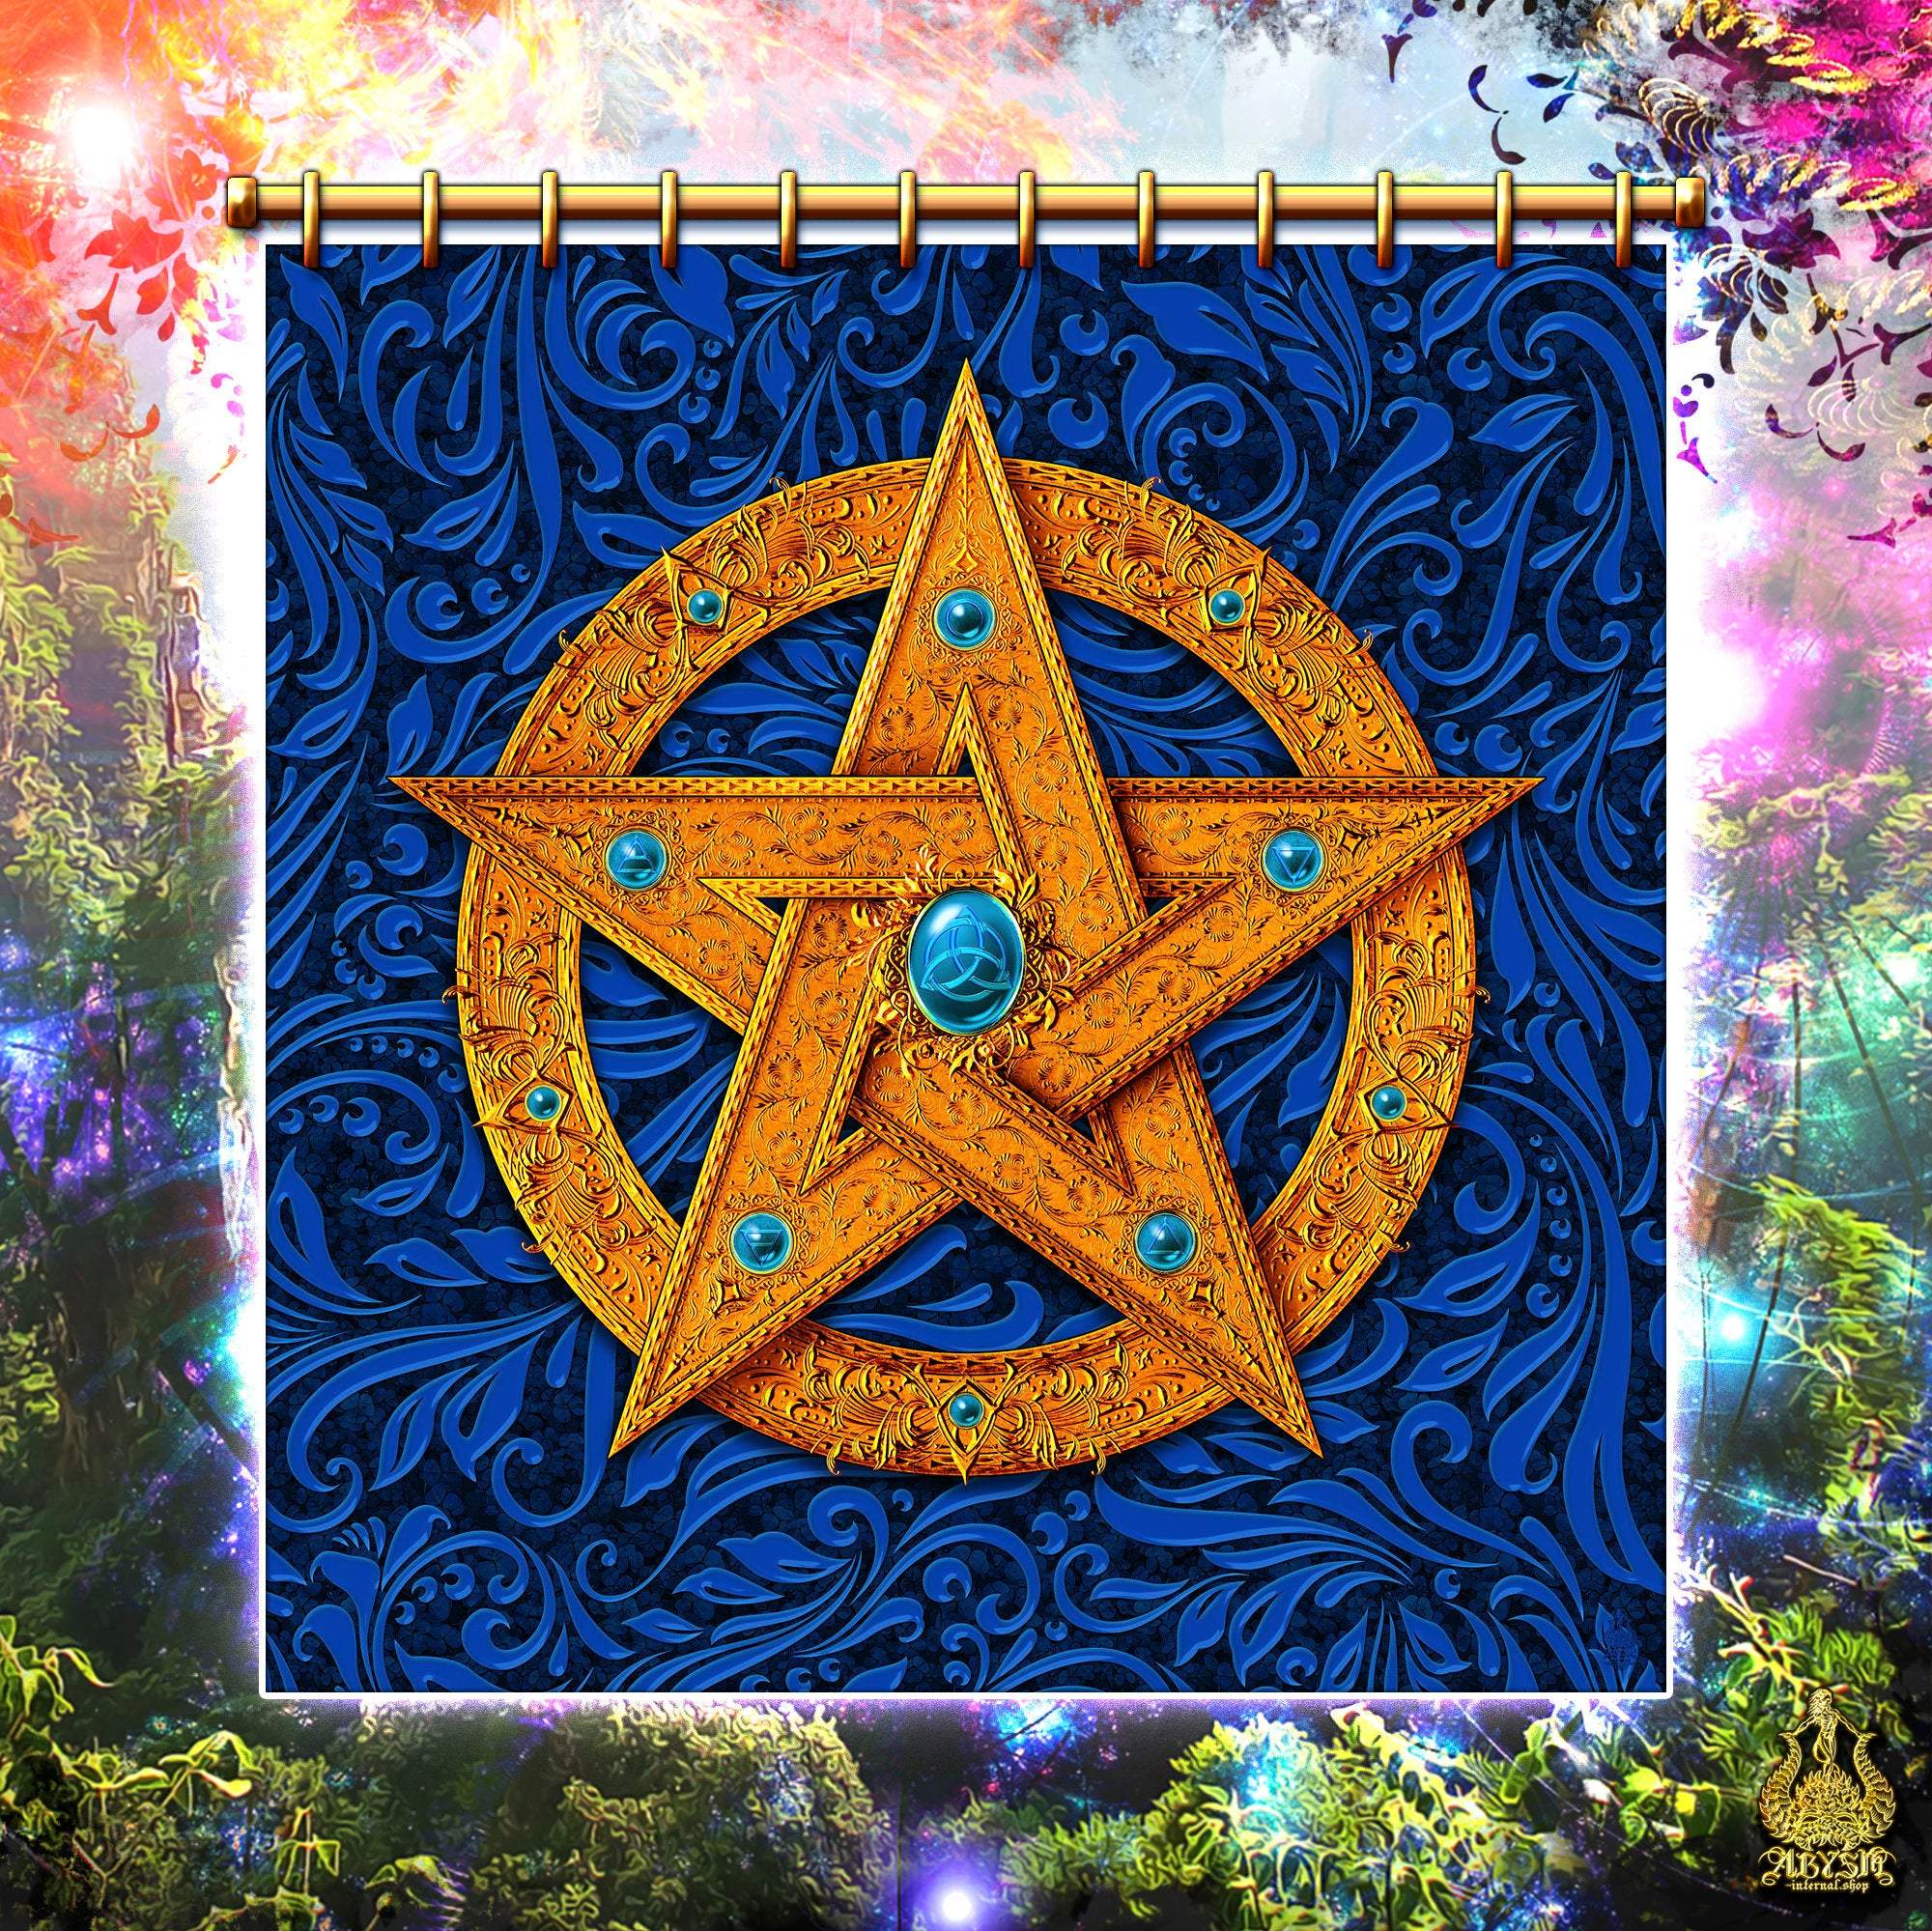 Pentacle Shower Curtain, Witch Bathroom Decor, Wicca Art, Eclectic and Funky Home - Gold Star, 4 Colours - Abysm Internal